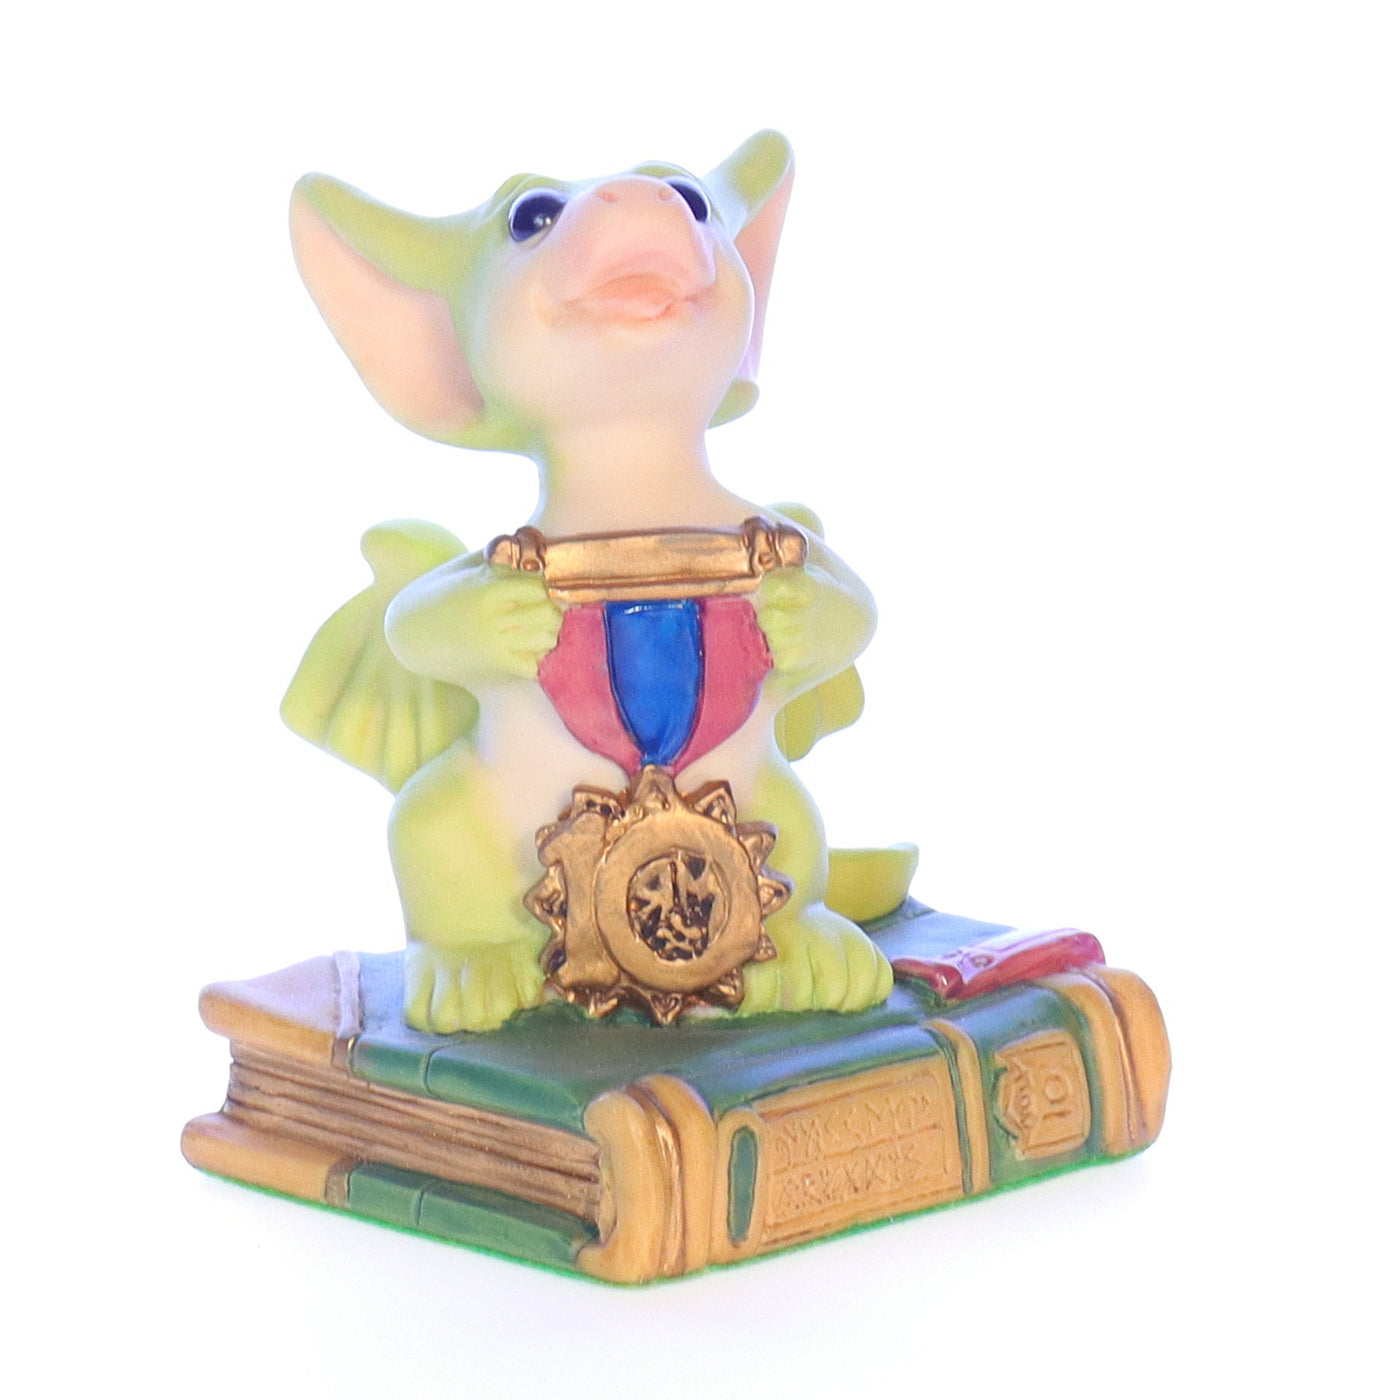 Whimsical_World_of_Pocket_Dragons_053839028875_The_Winner_Fantasy_Figurine_1998_Box Front View